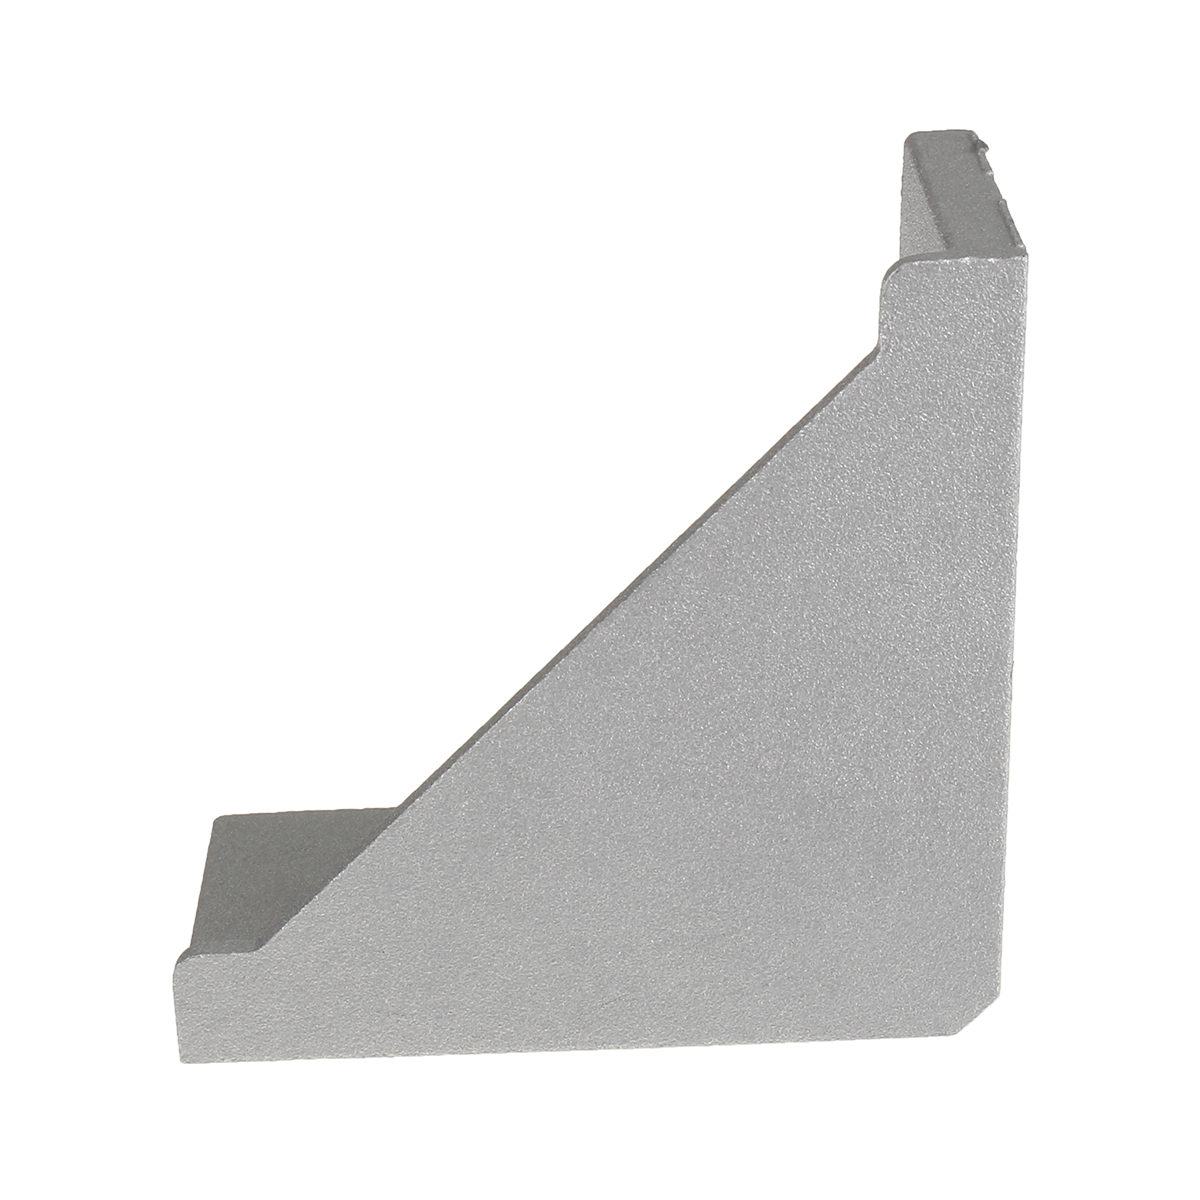 Sulevetrade-AJ30-30times60mm-Aluminum-Angle-Corner-Joint-Connector-Right-Angle-Bracket-Furniture-Fit-1293673